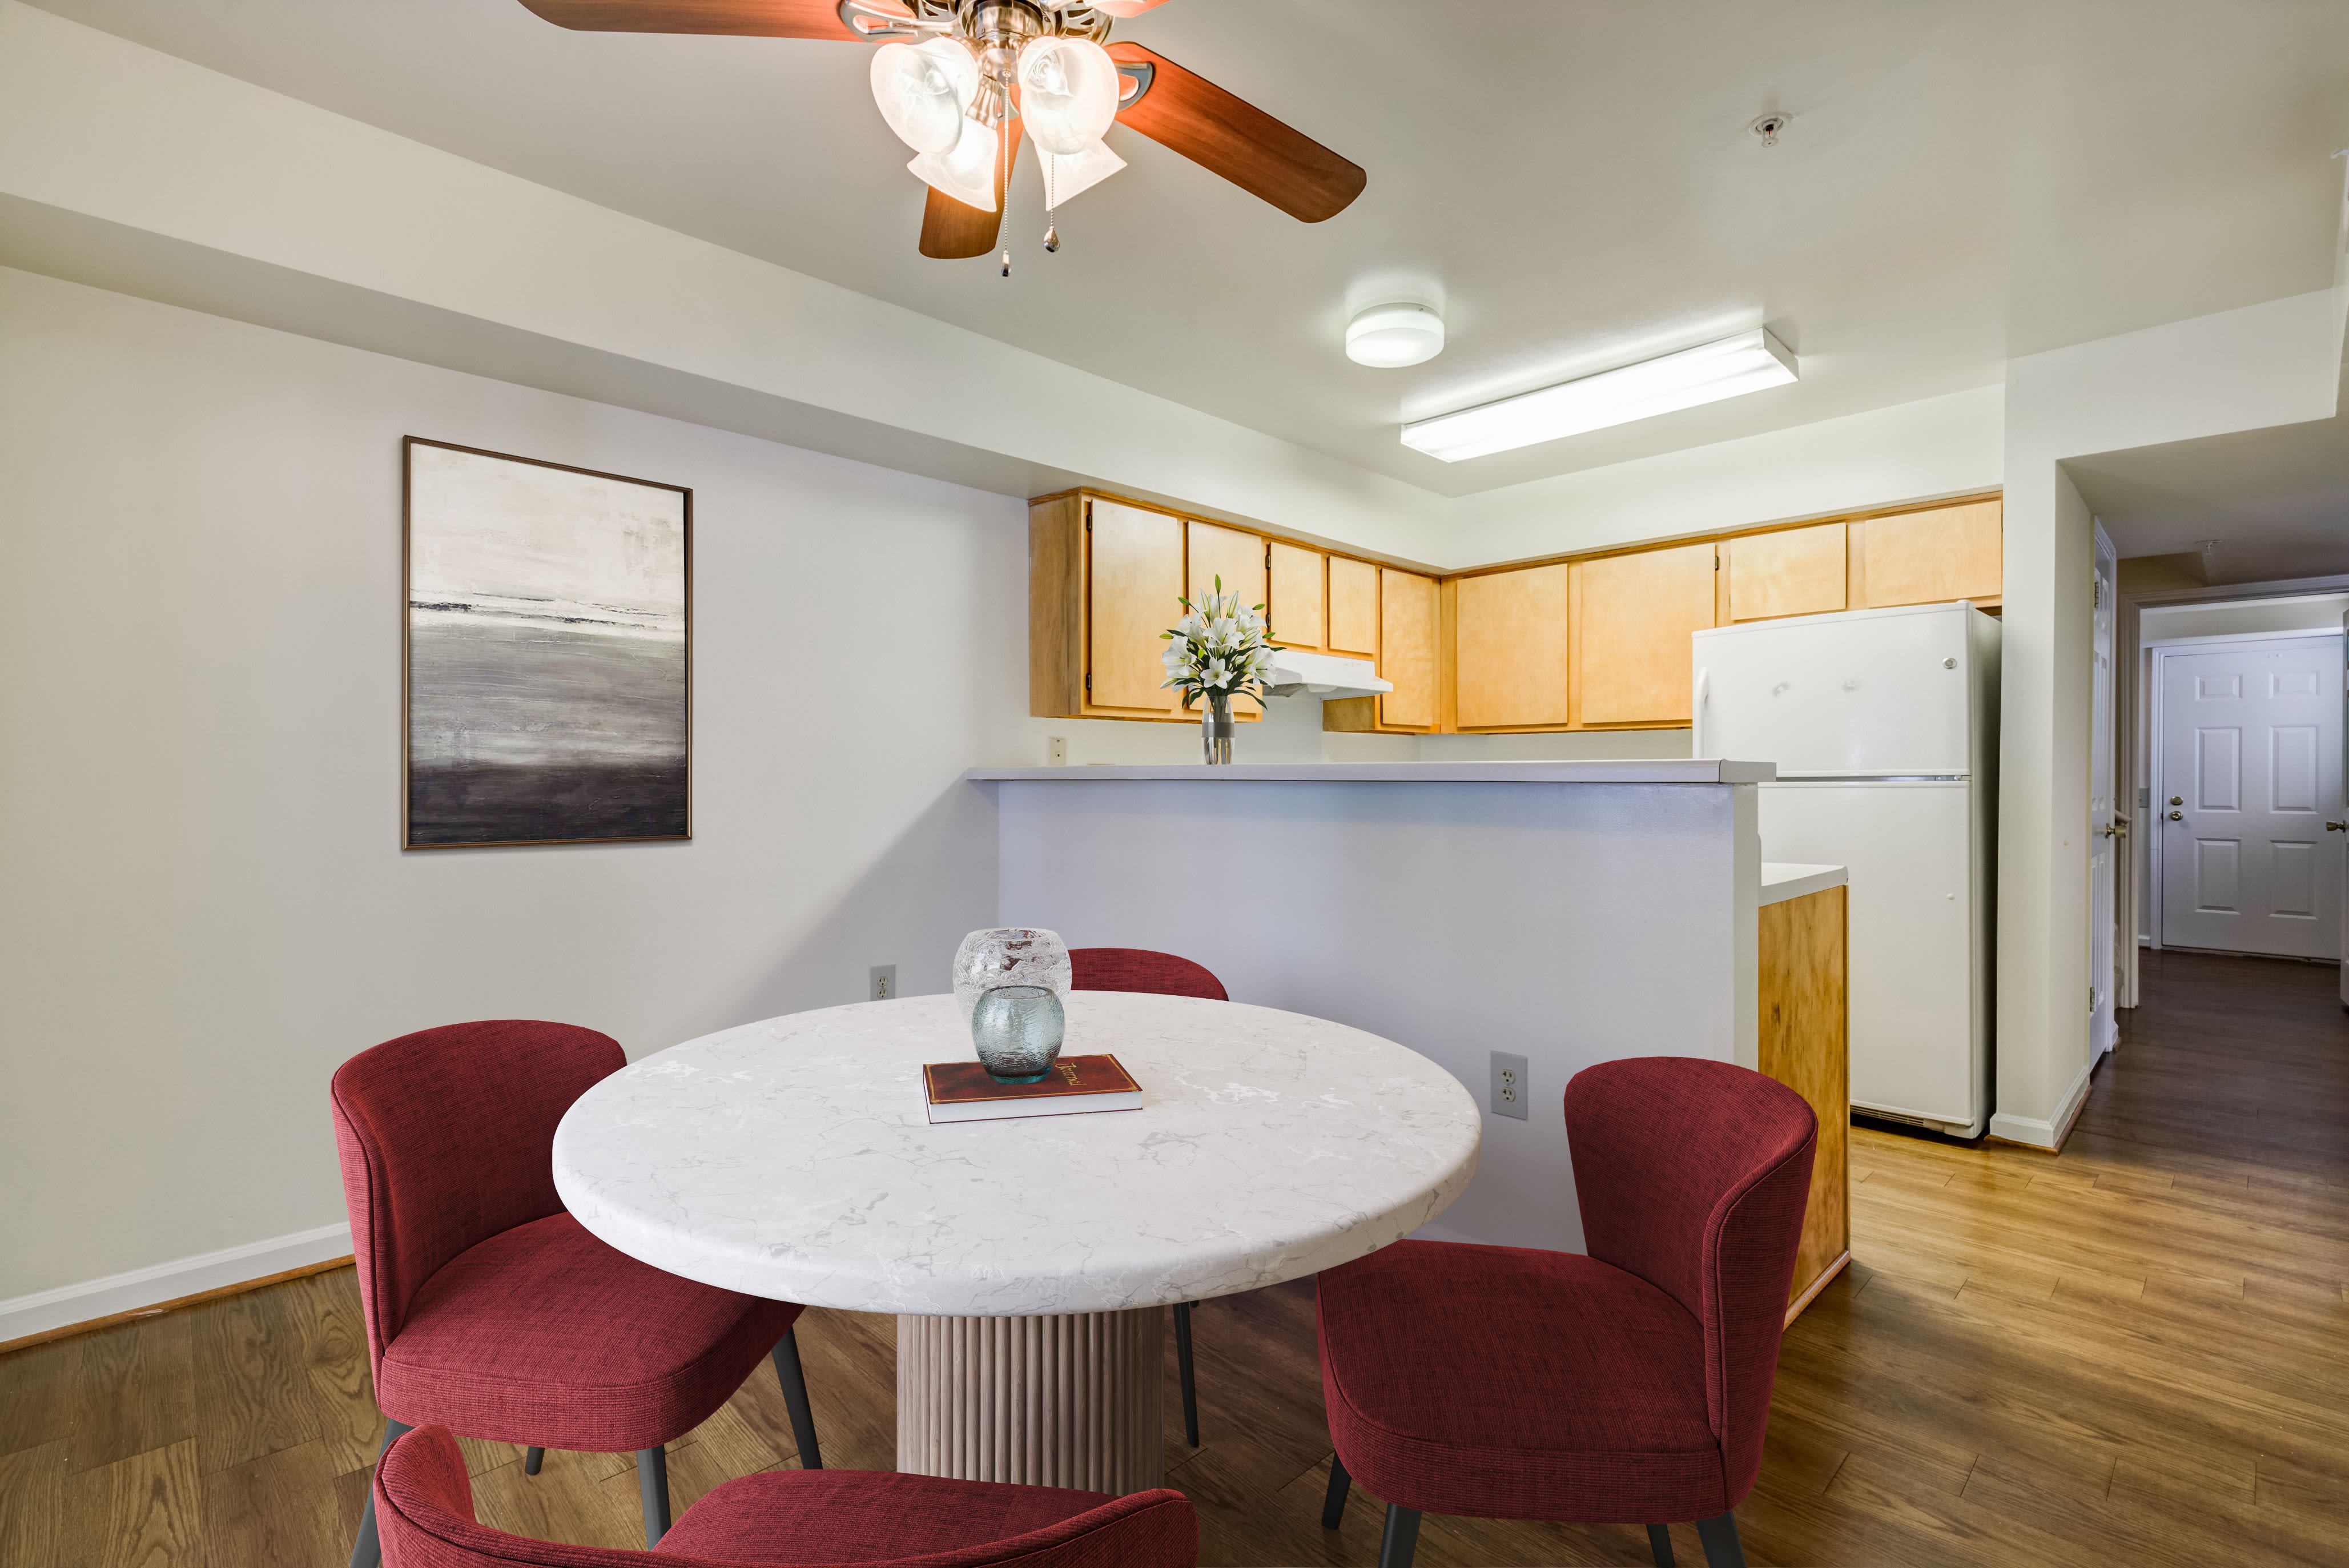 Table with 2 chairs near the kitchen at Dahlgren Townhomes in Dahlgren, Virginia